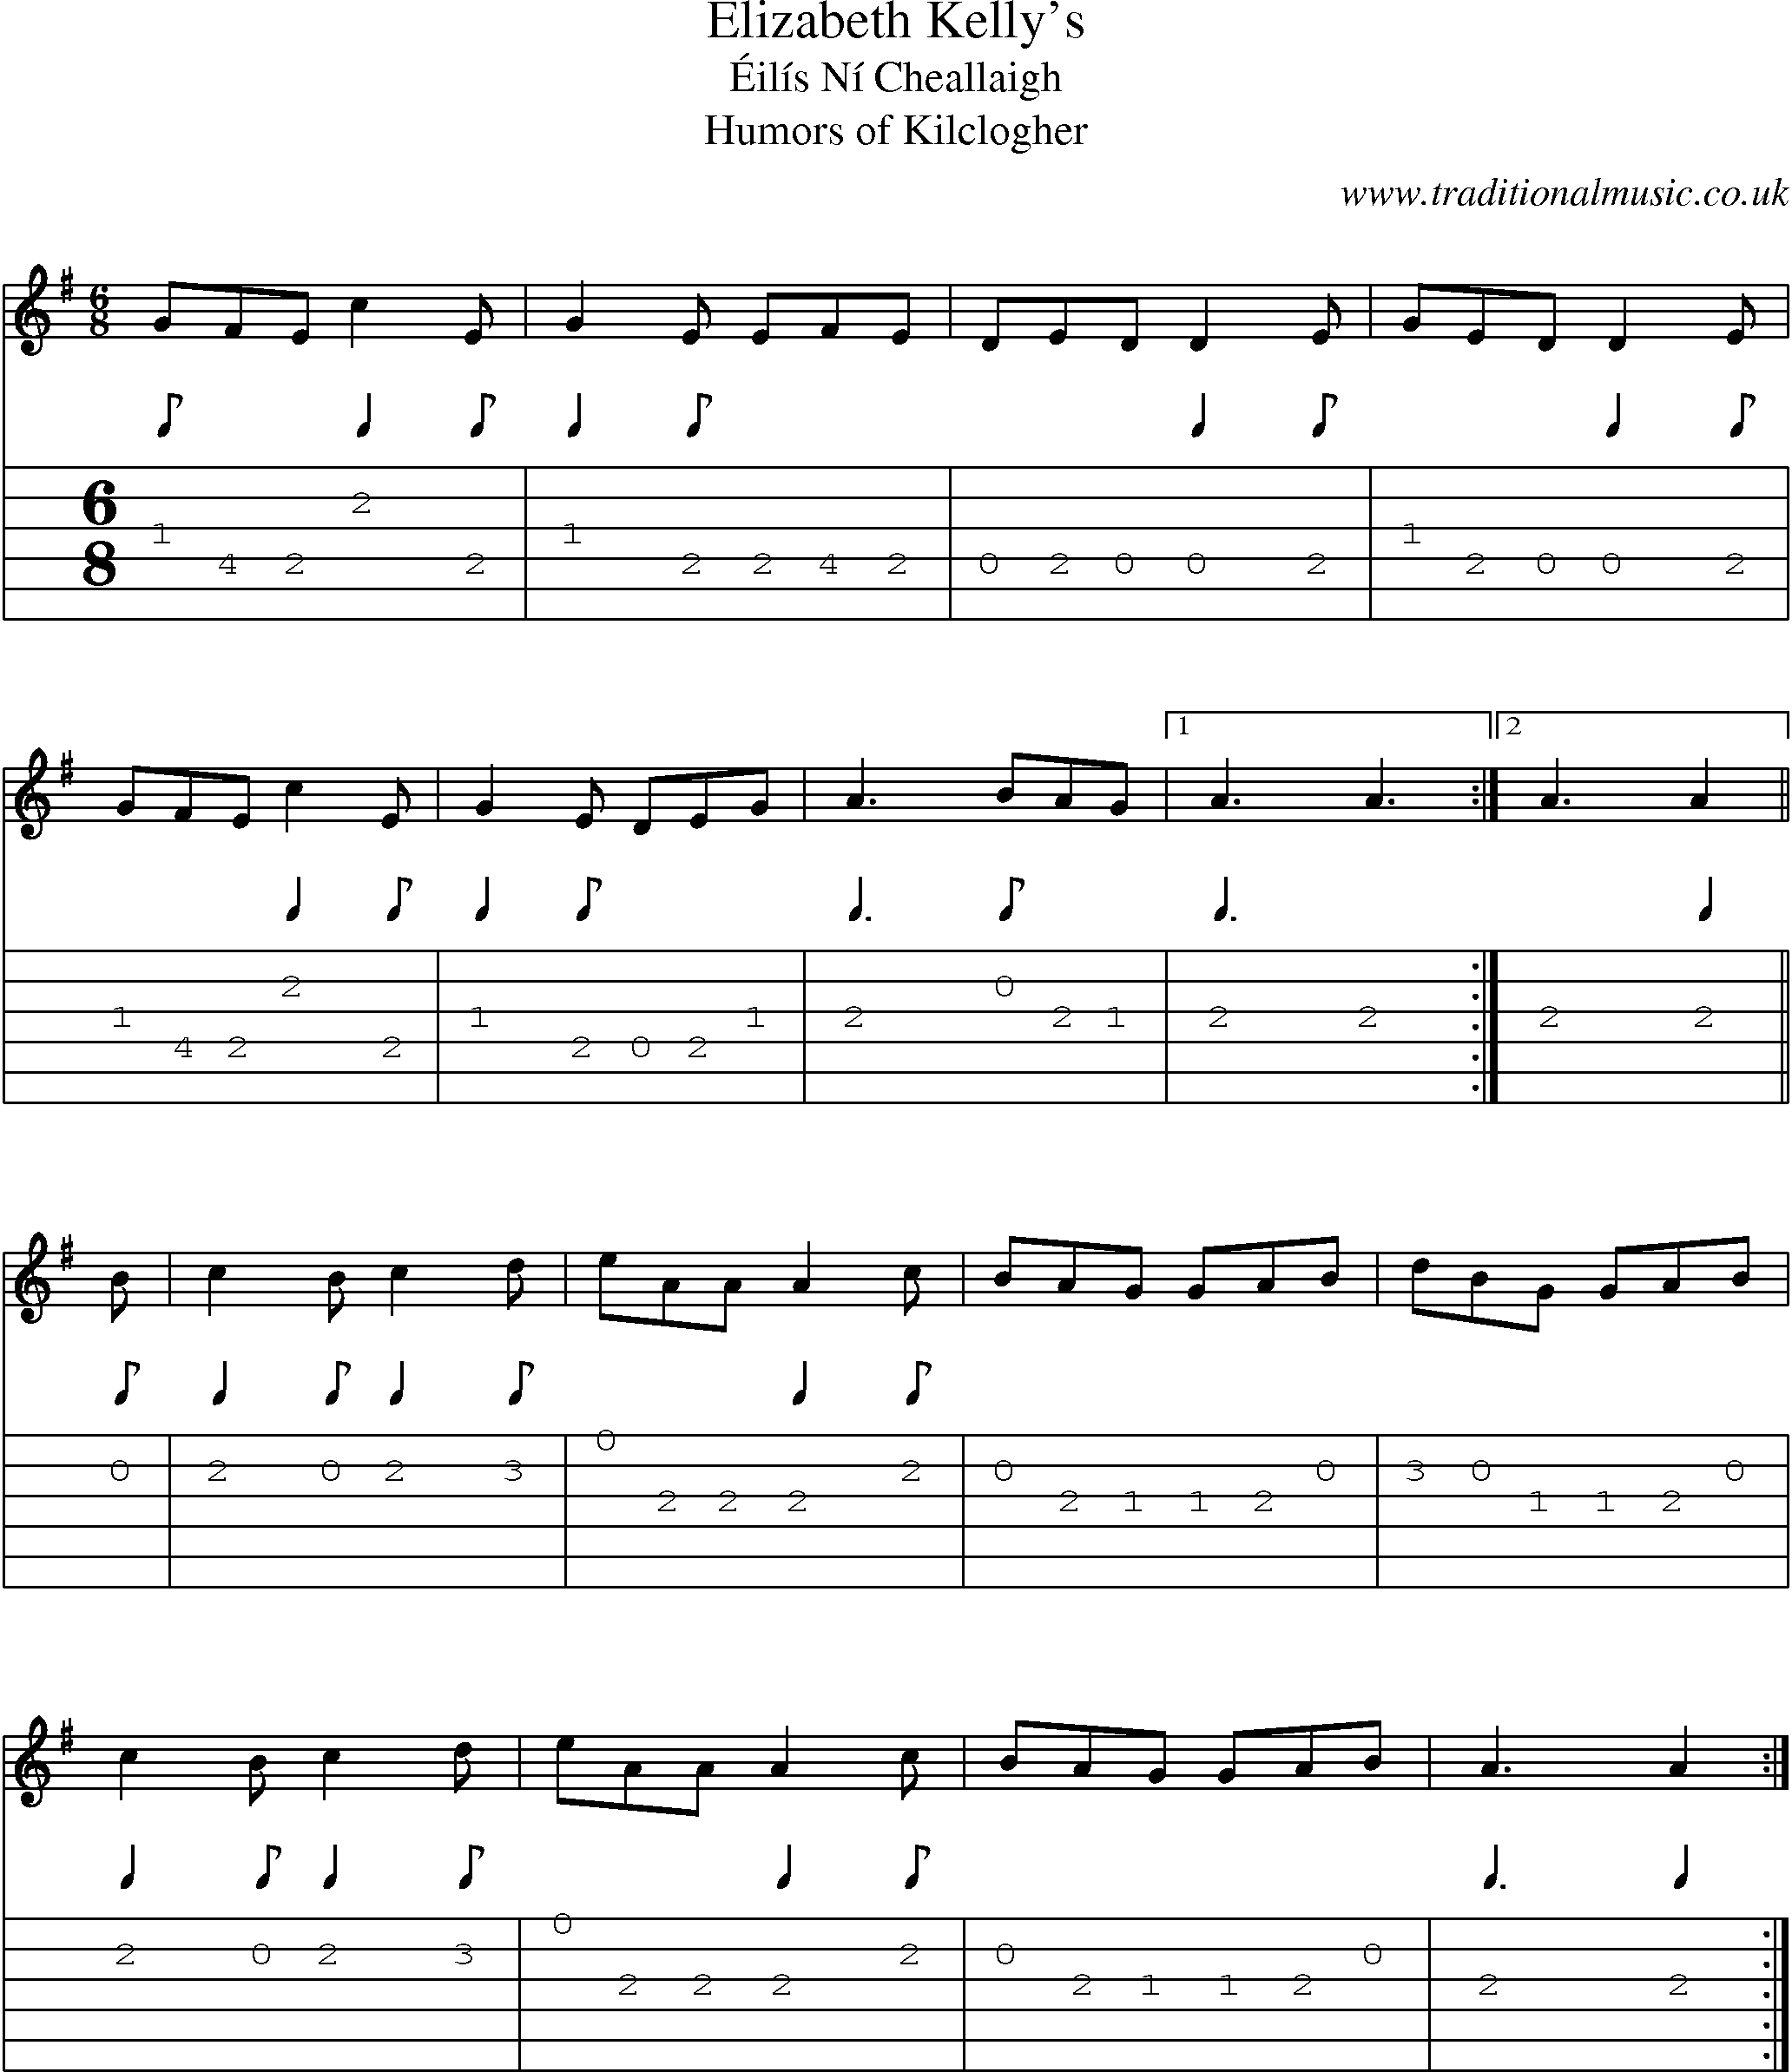 Music Score and Guitar Tabs for Elizabeth Kellys